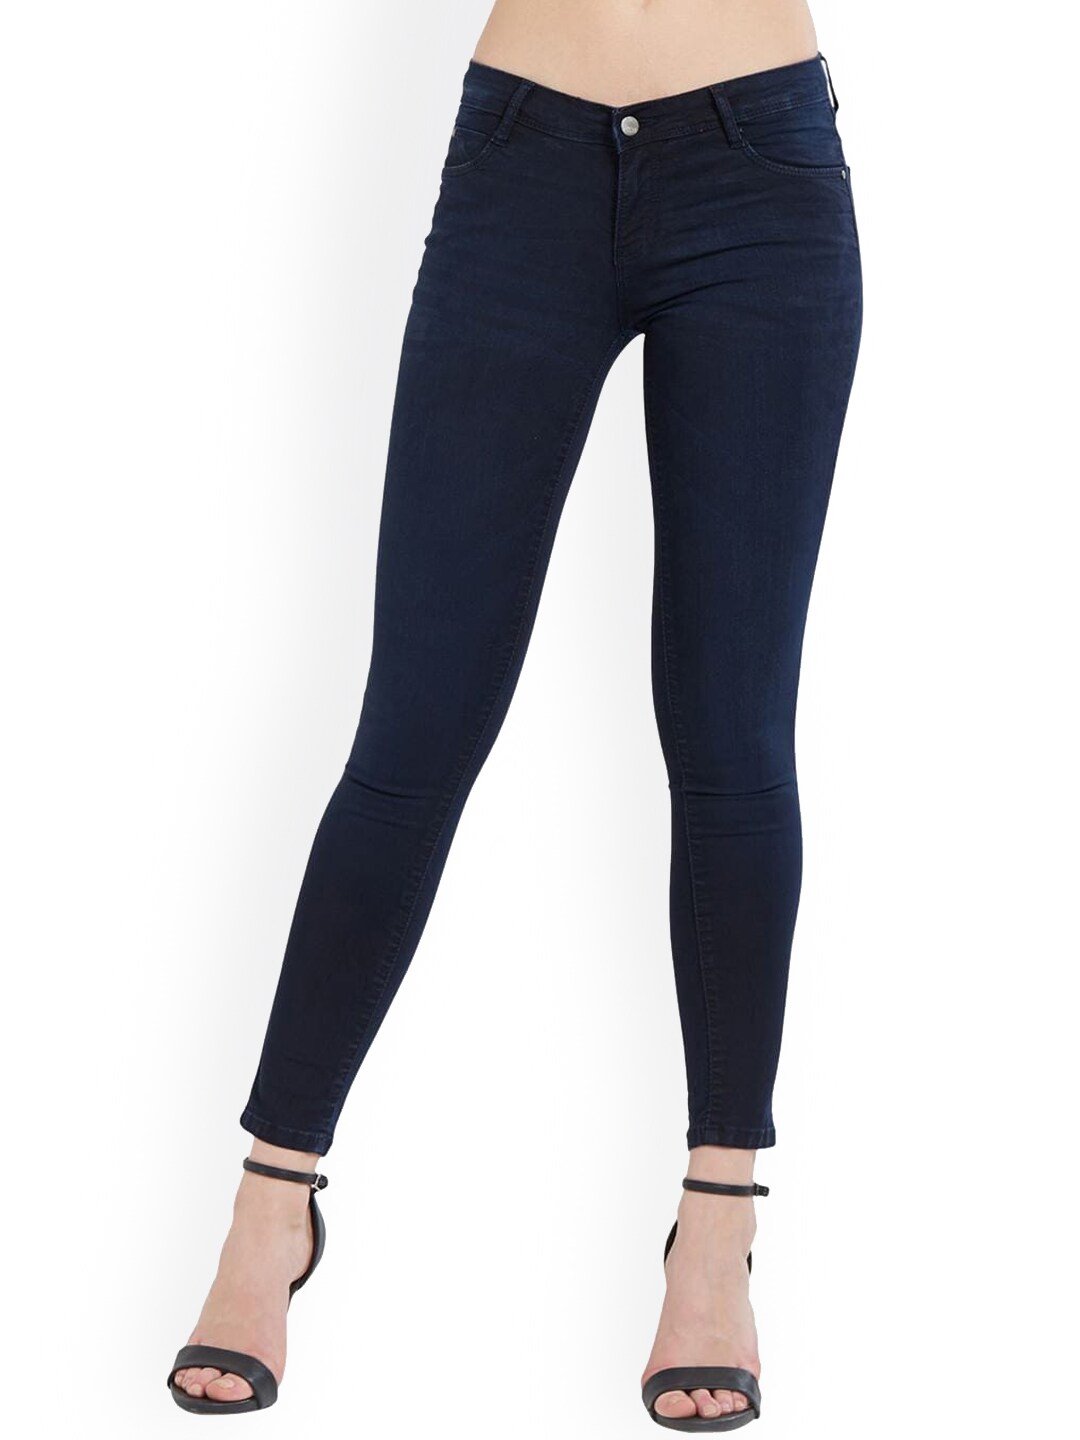 Kraus Jeans Women Navy Blue Cropped Skinny Fit Jeans Price in India